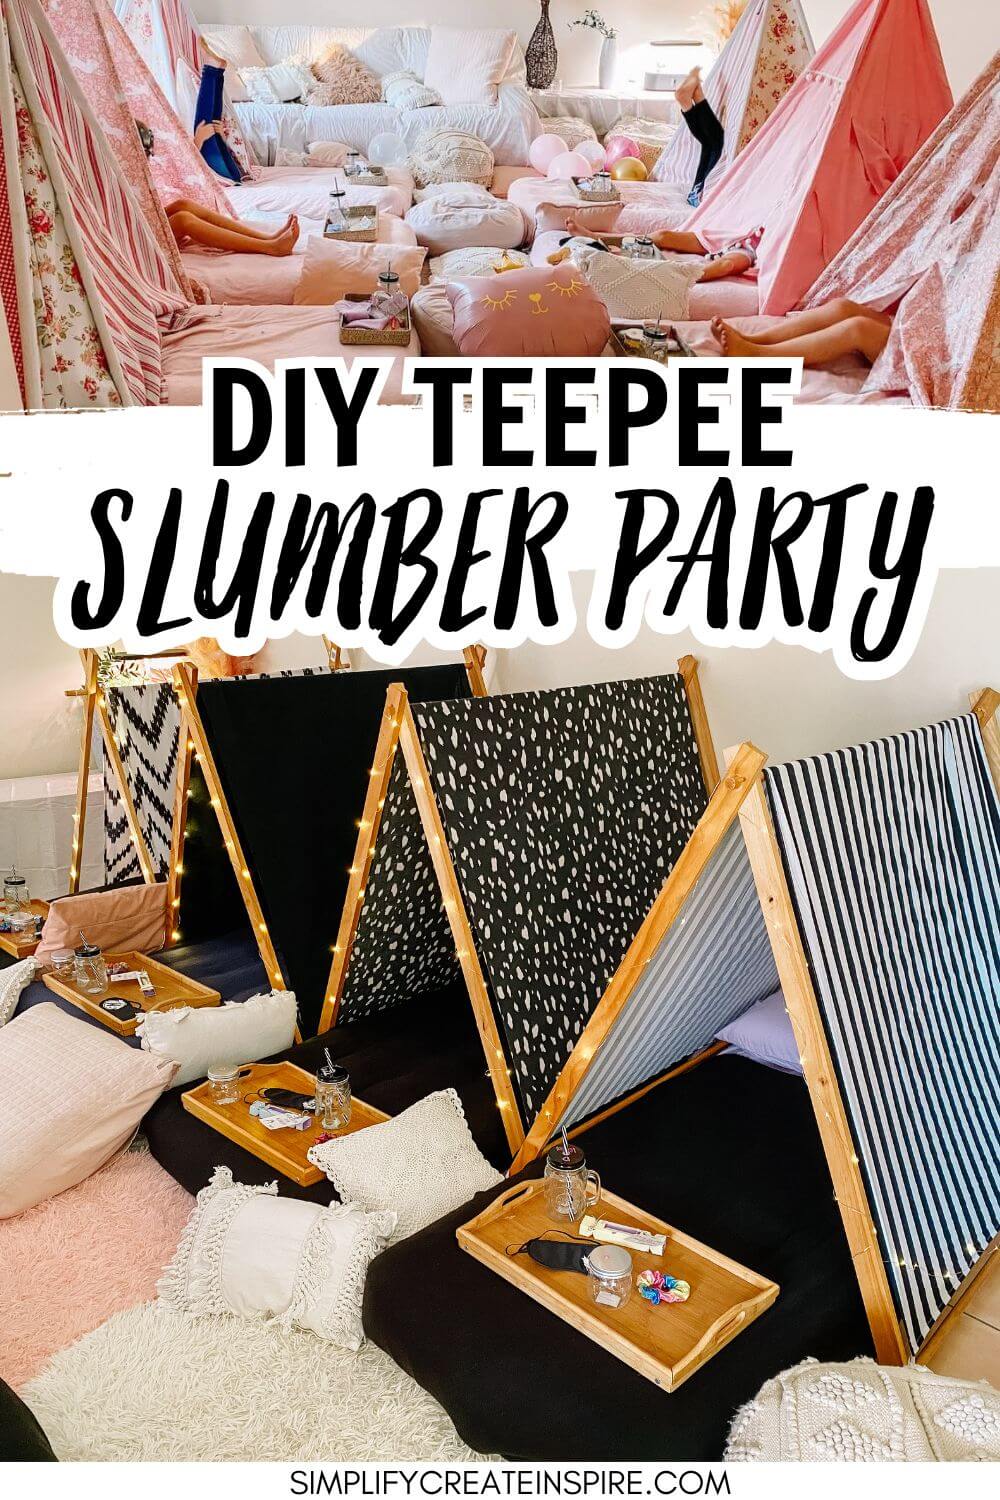 Diy teepee slumber party ideas and indoor glamping party activities.